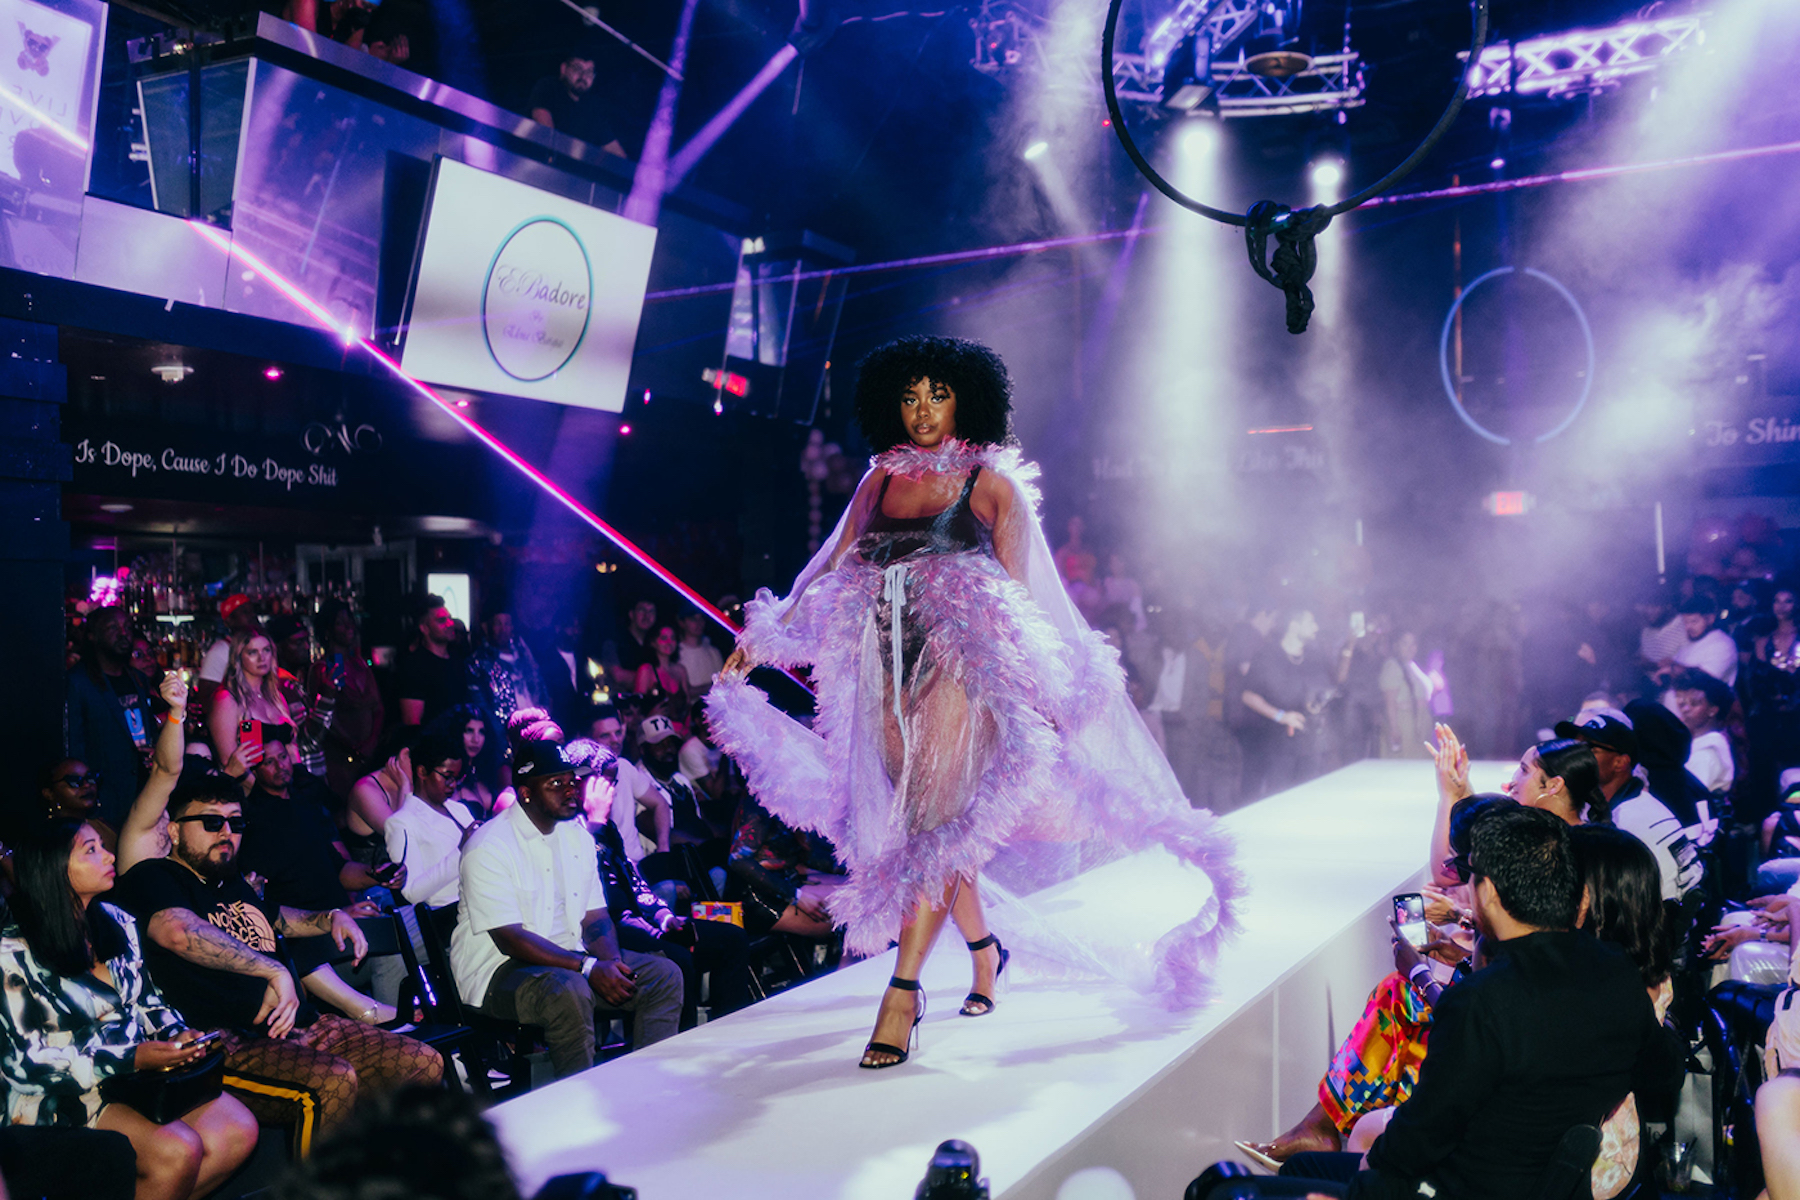 Louis Vuitton Cruises Through the Perot in an Influencer-Studded